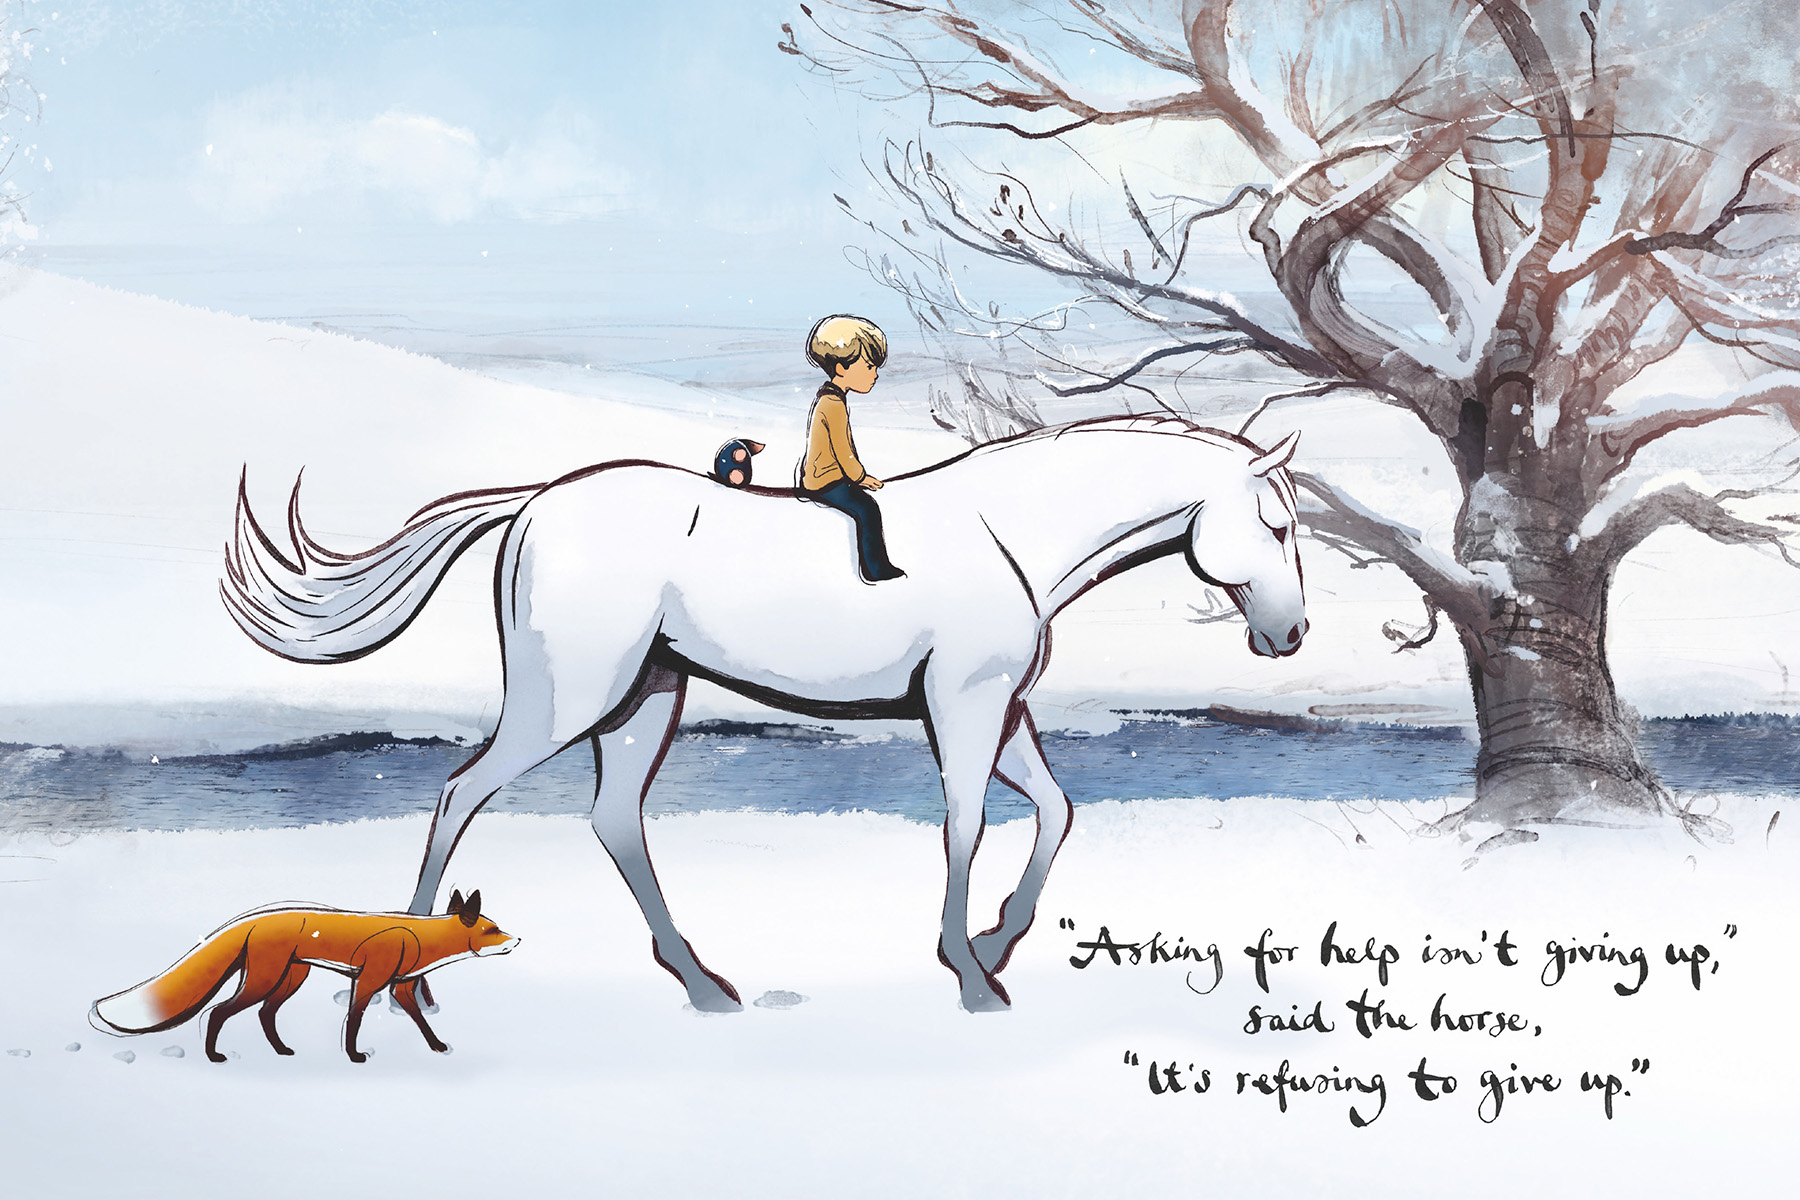 Sneak preview: The Boy, the Mole, the Fox and the Horse: The Animated Story